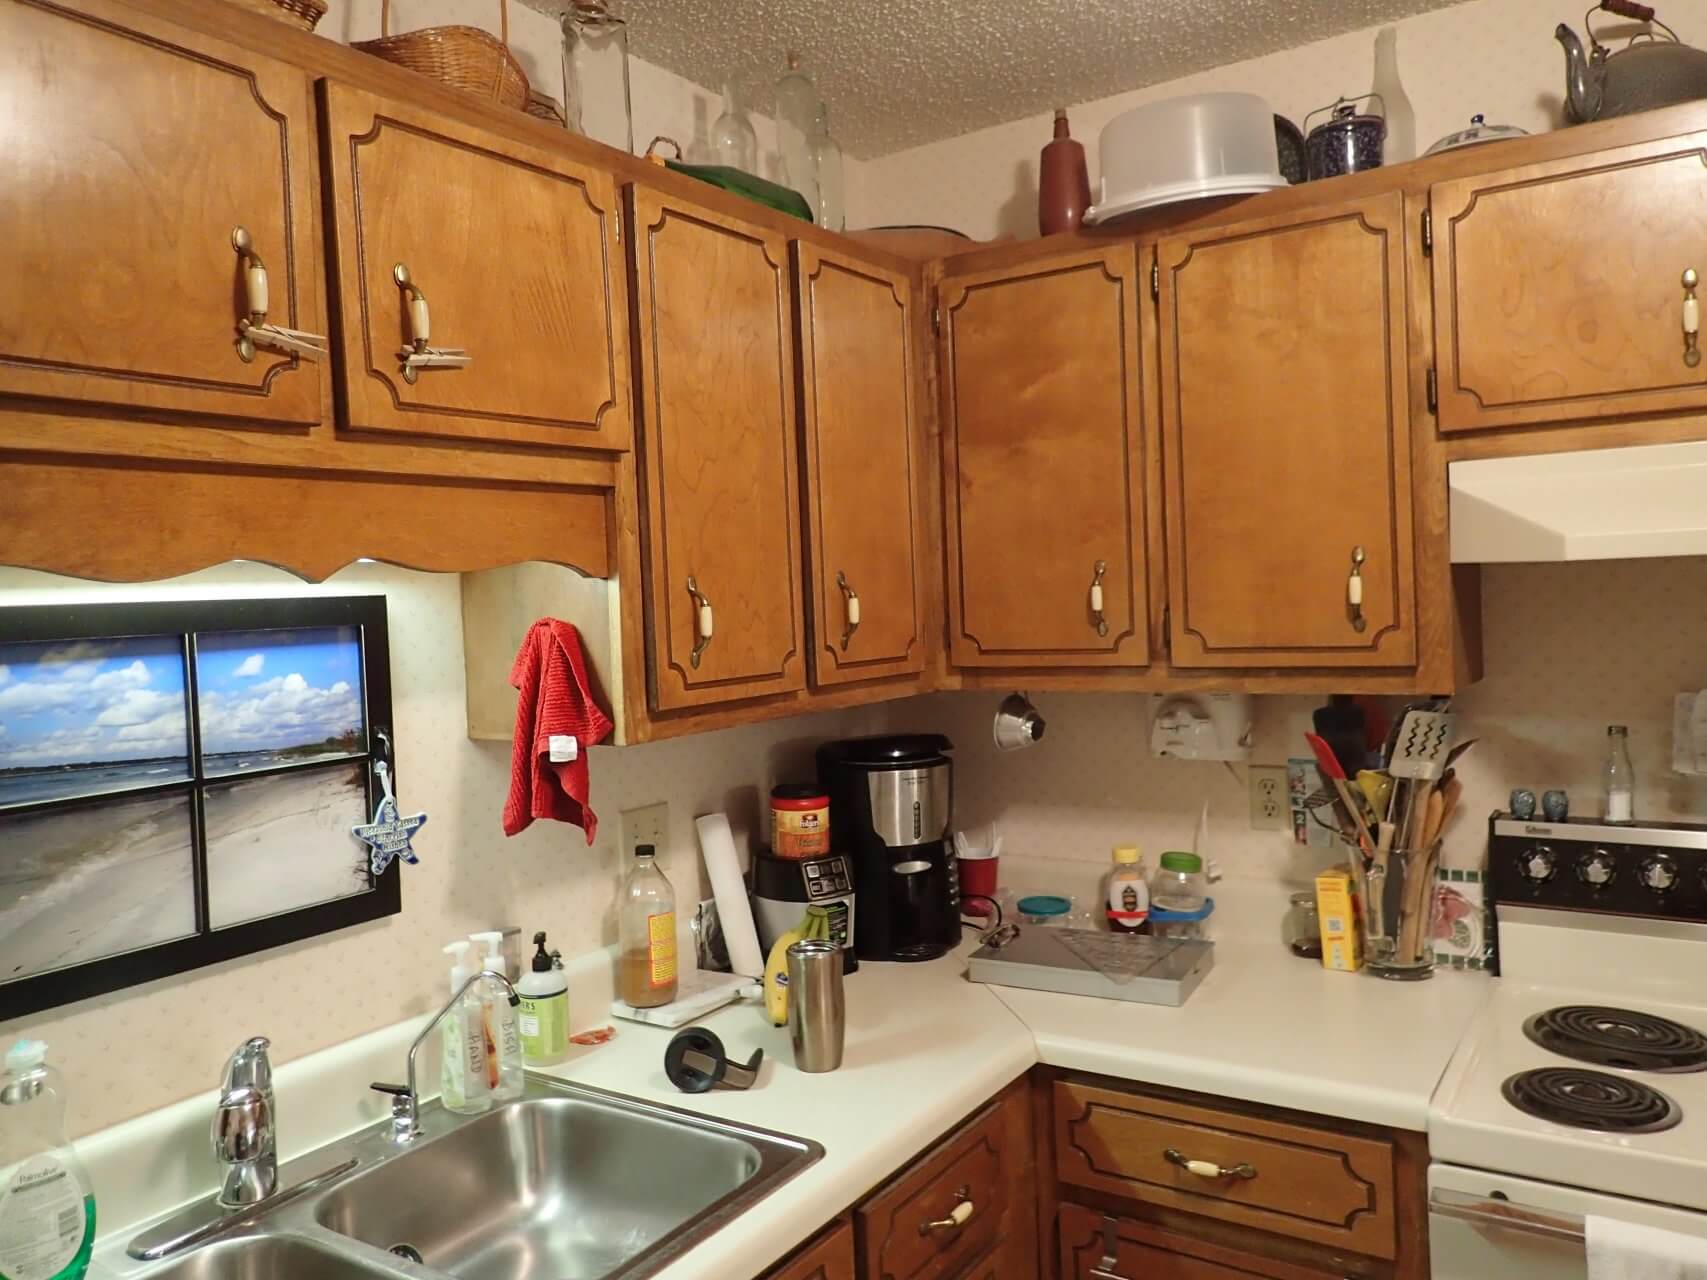 Old kitchen with short upper cabinets